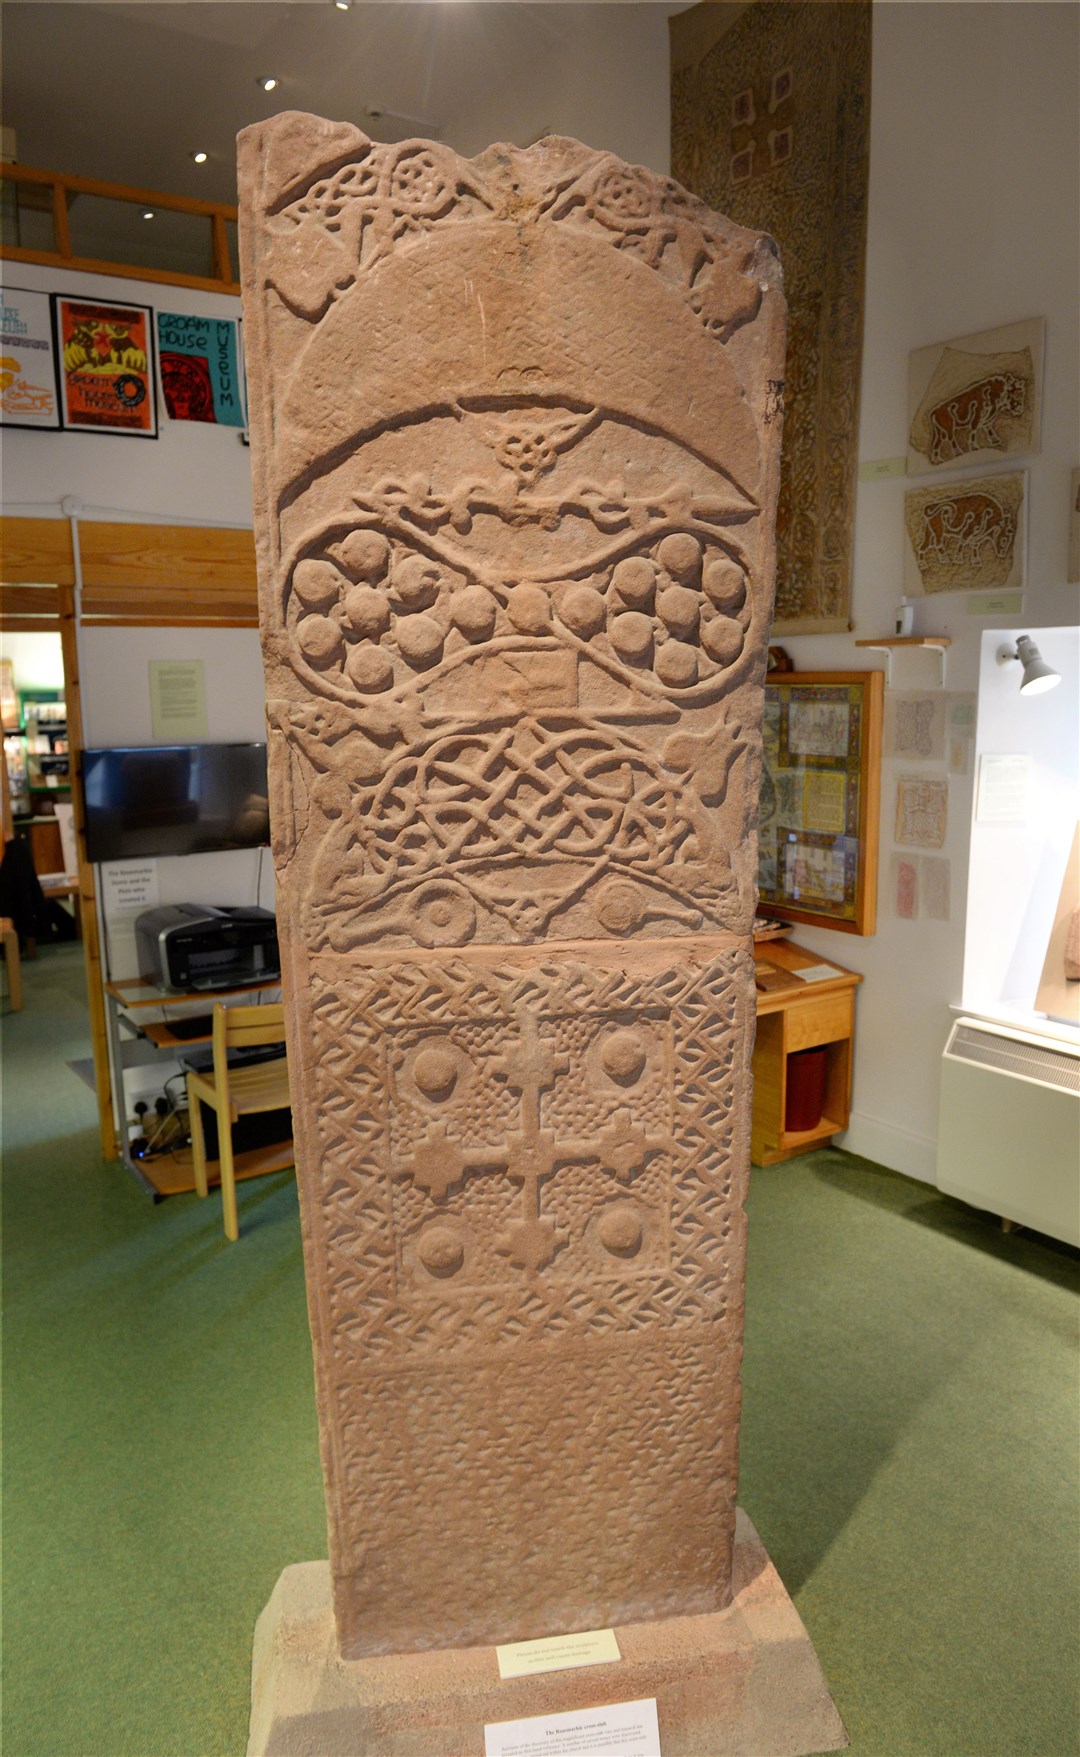 The Rosemarkie cross-slab inspires awe in many who see it up close for the first time.